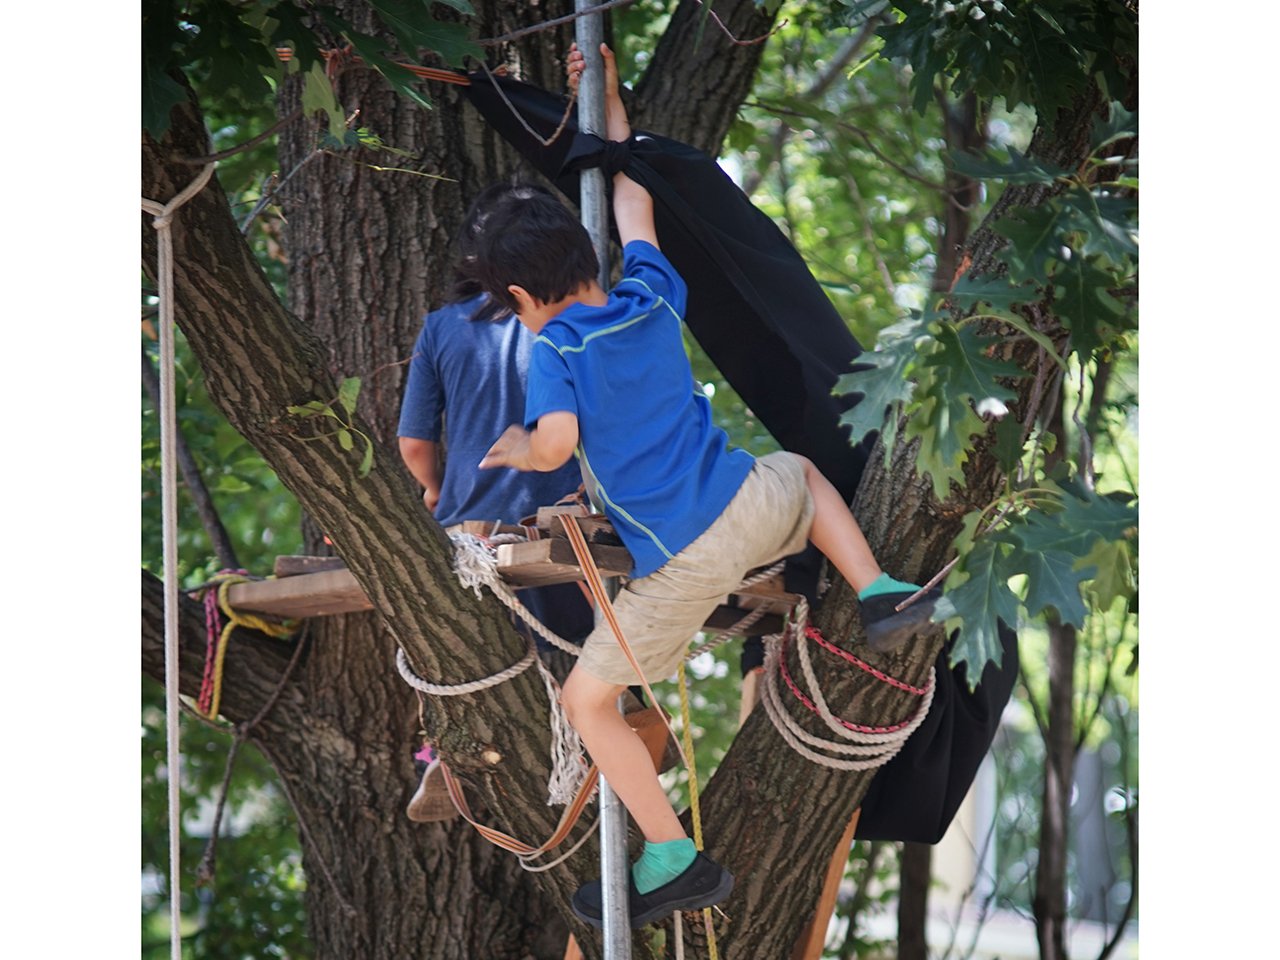 Child climbing a tree at Play:ground on Governors Island